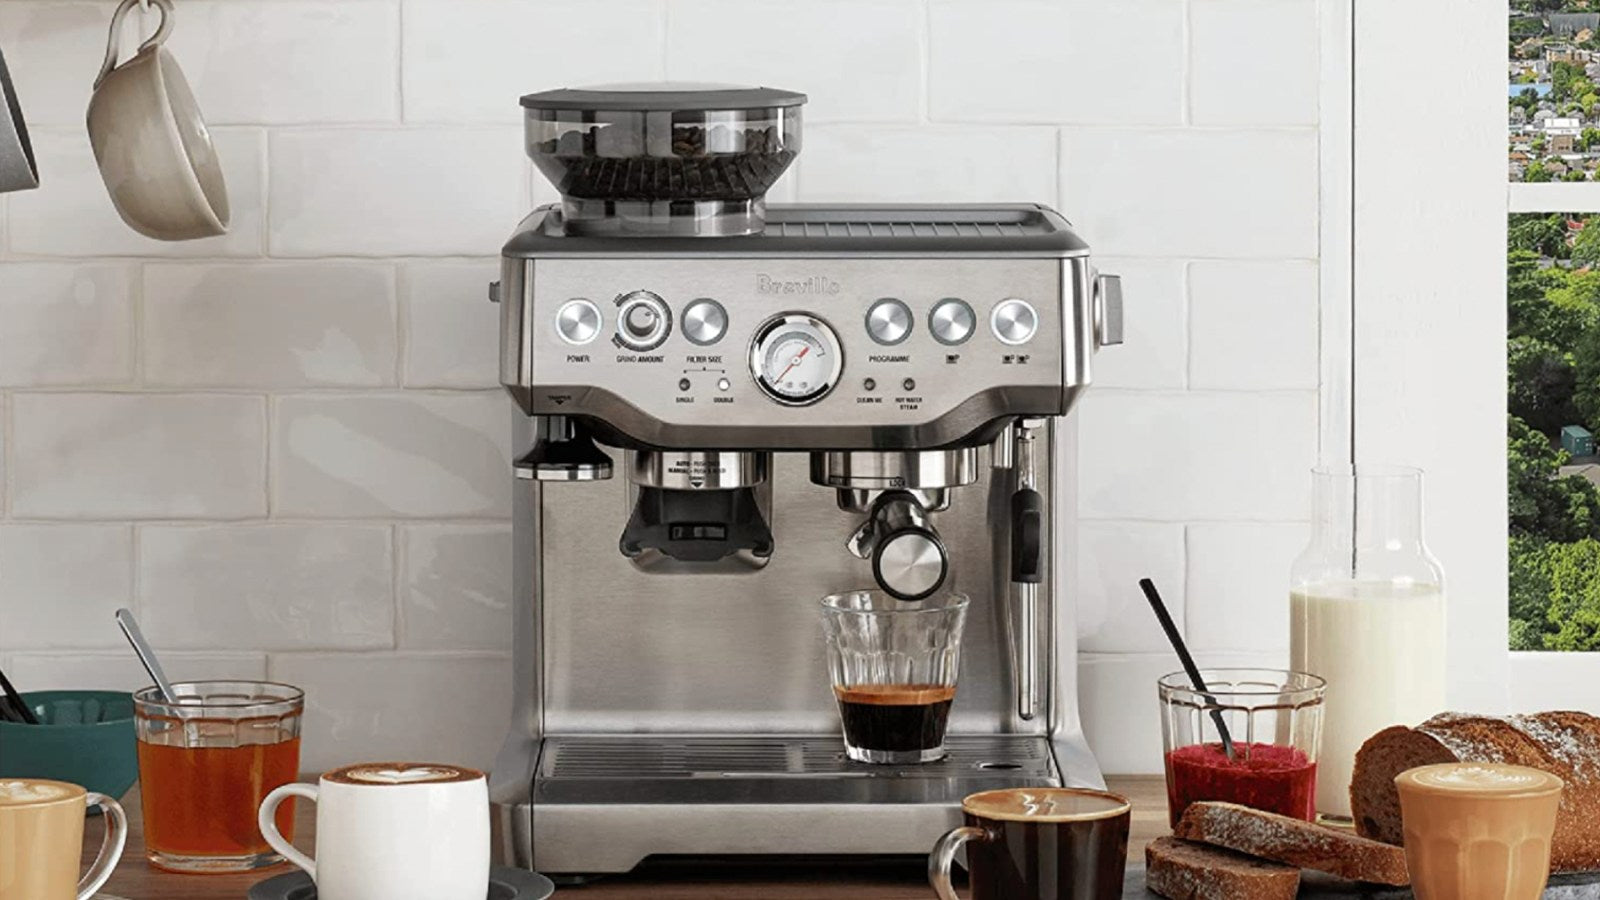 Espresso Machine Gift Ideas: Finding the Perfect Present for Coffee Lovers